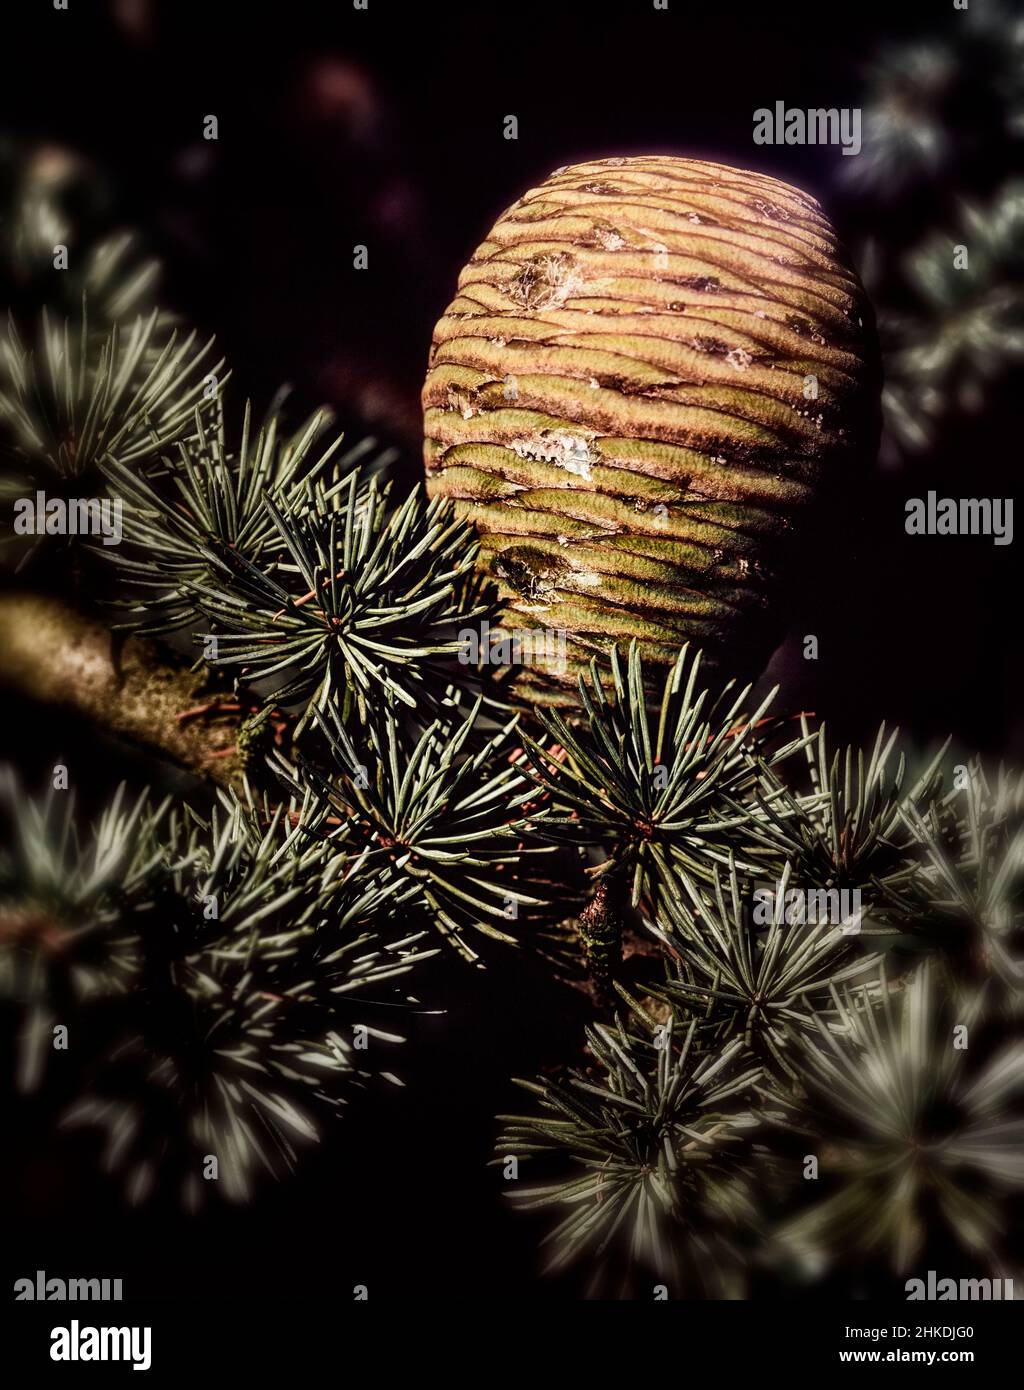 Natural close-up still life of conifer cone Stock Photo